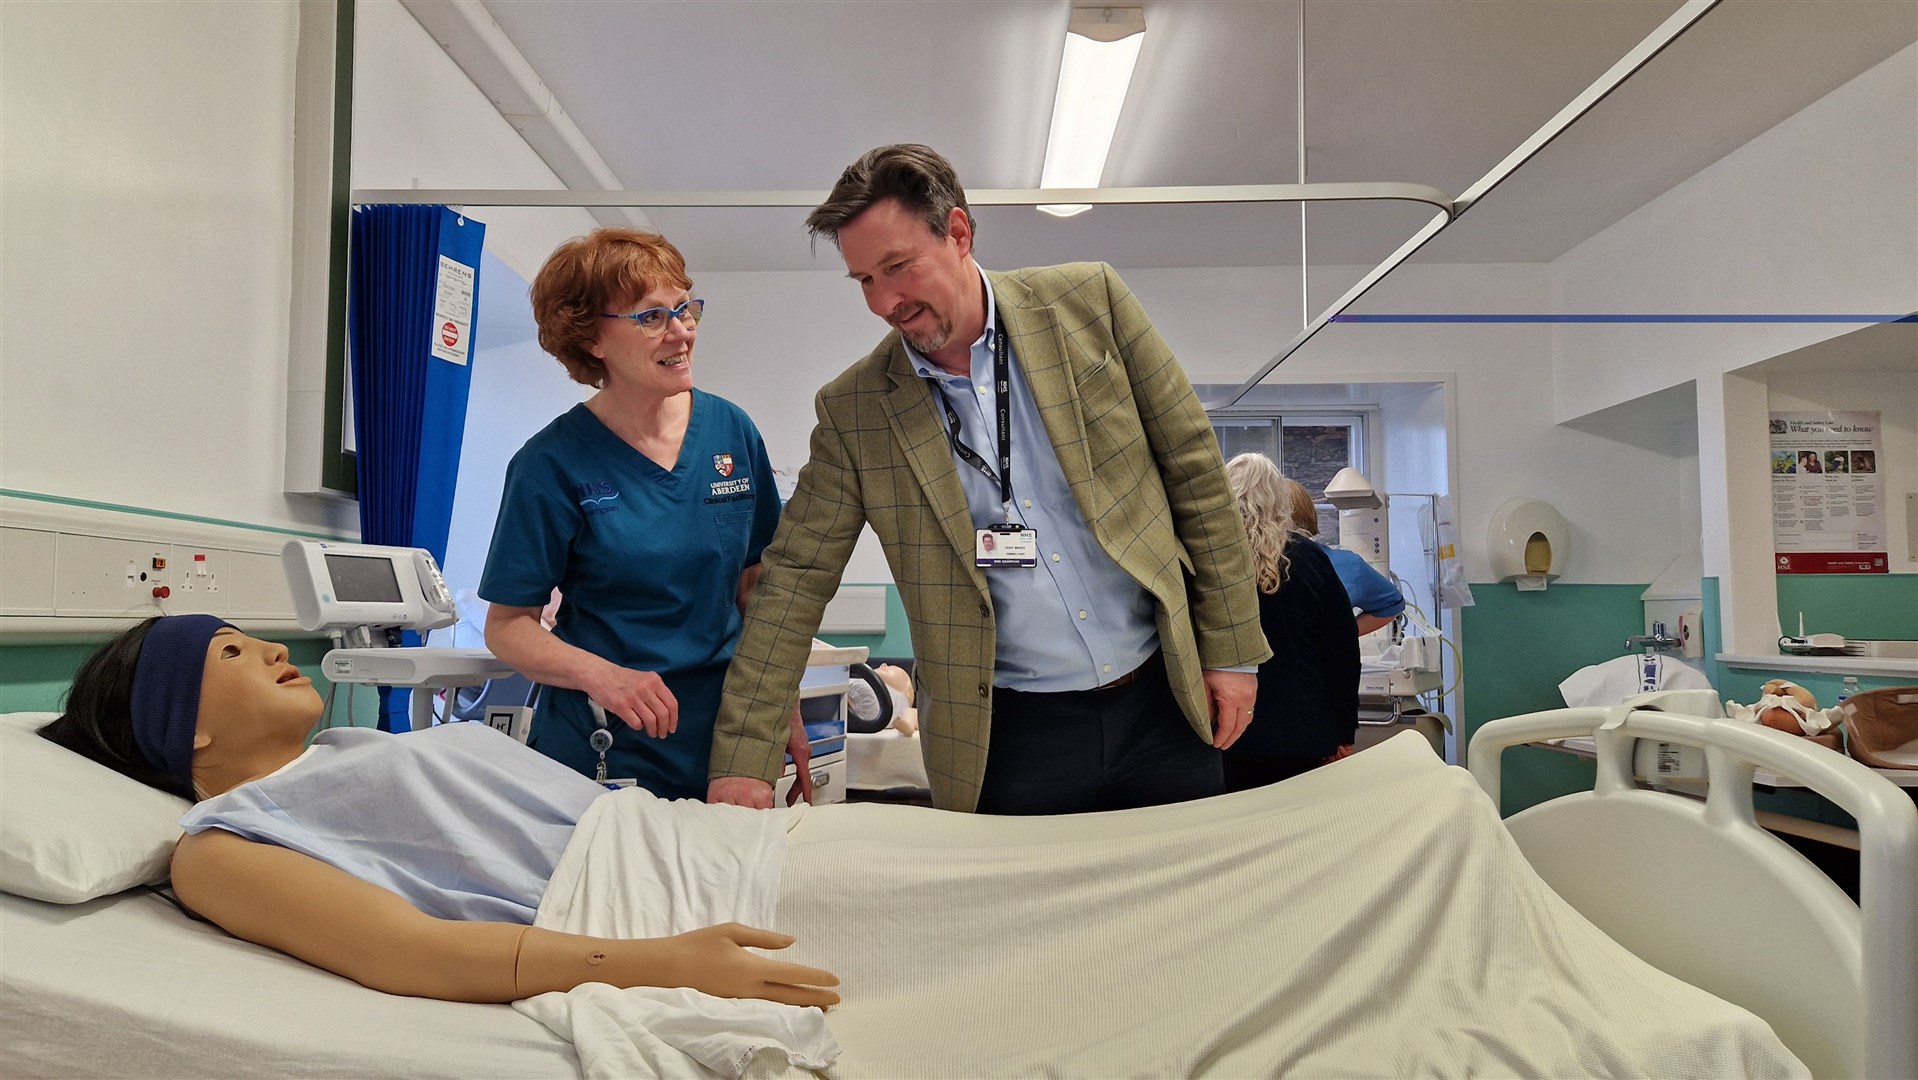 Professor Duff Bruce with one of the simulation mannequins.